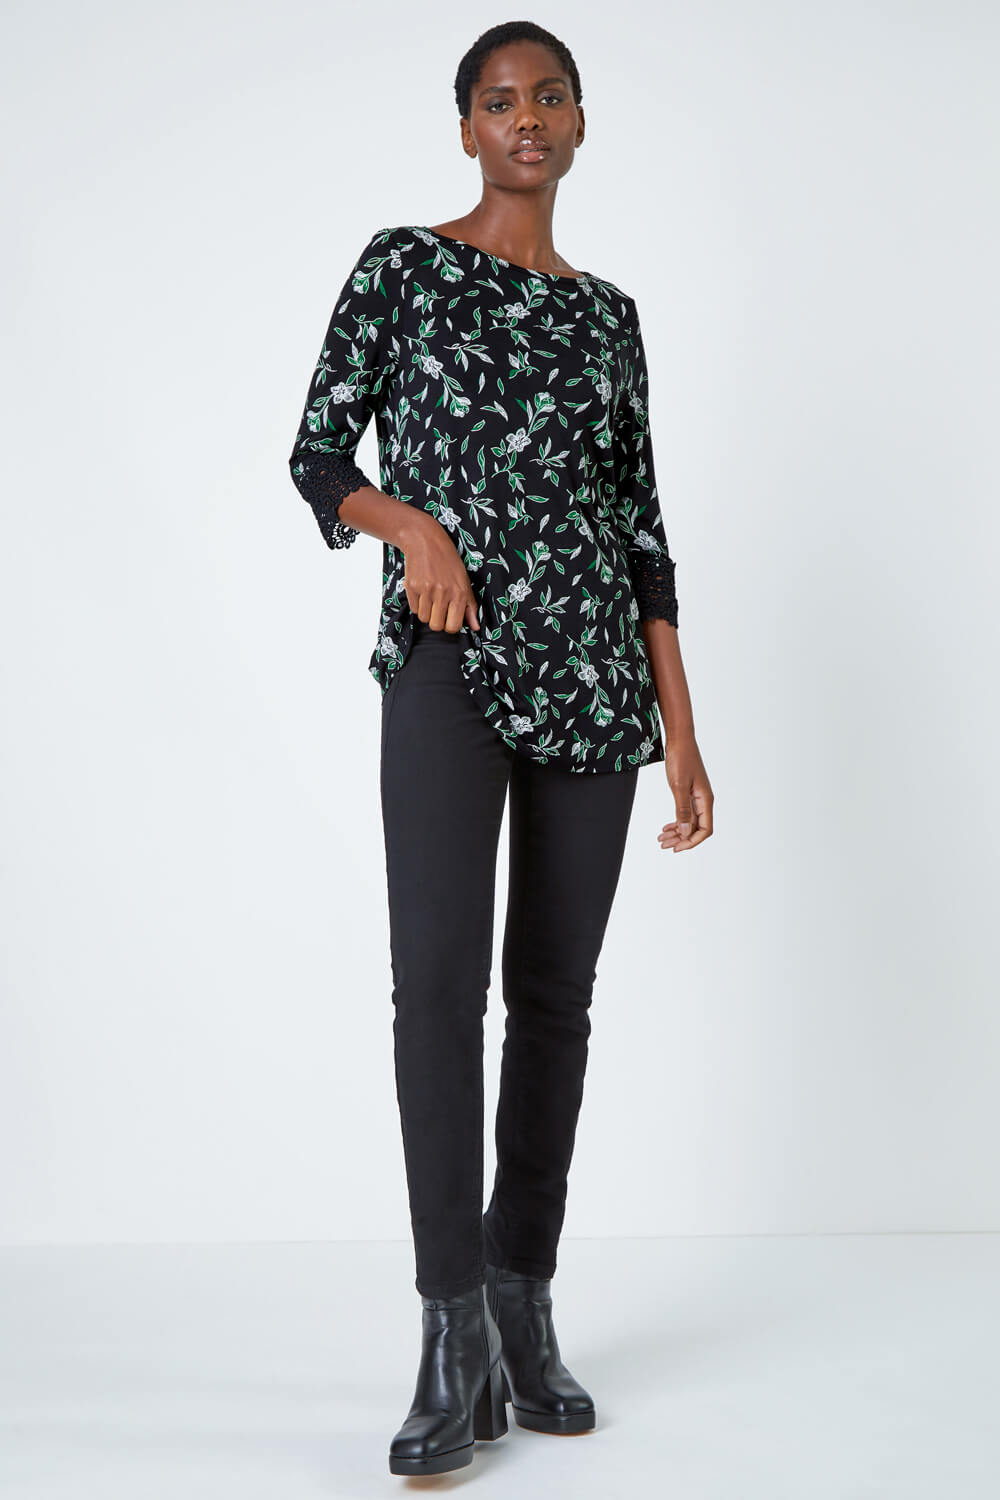 Green Floral Print Lace Detail Stretch Top, Image 2 of 5